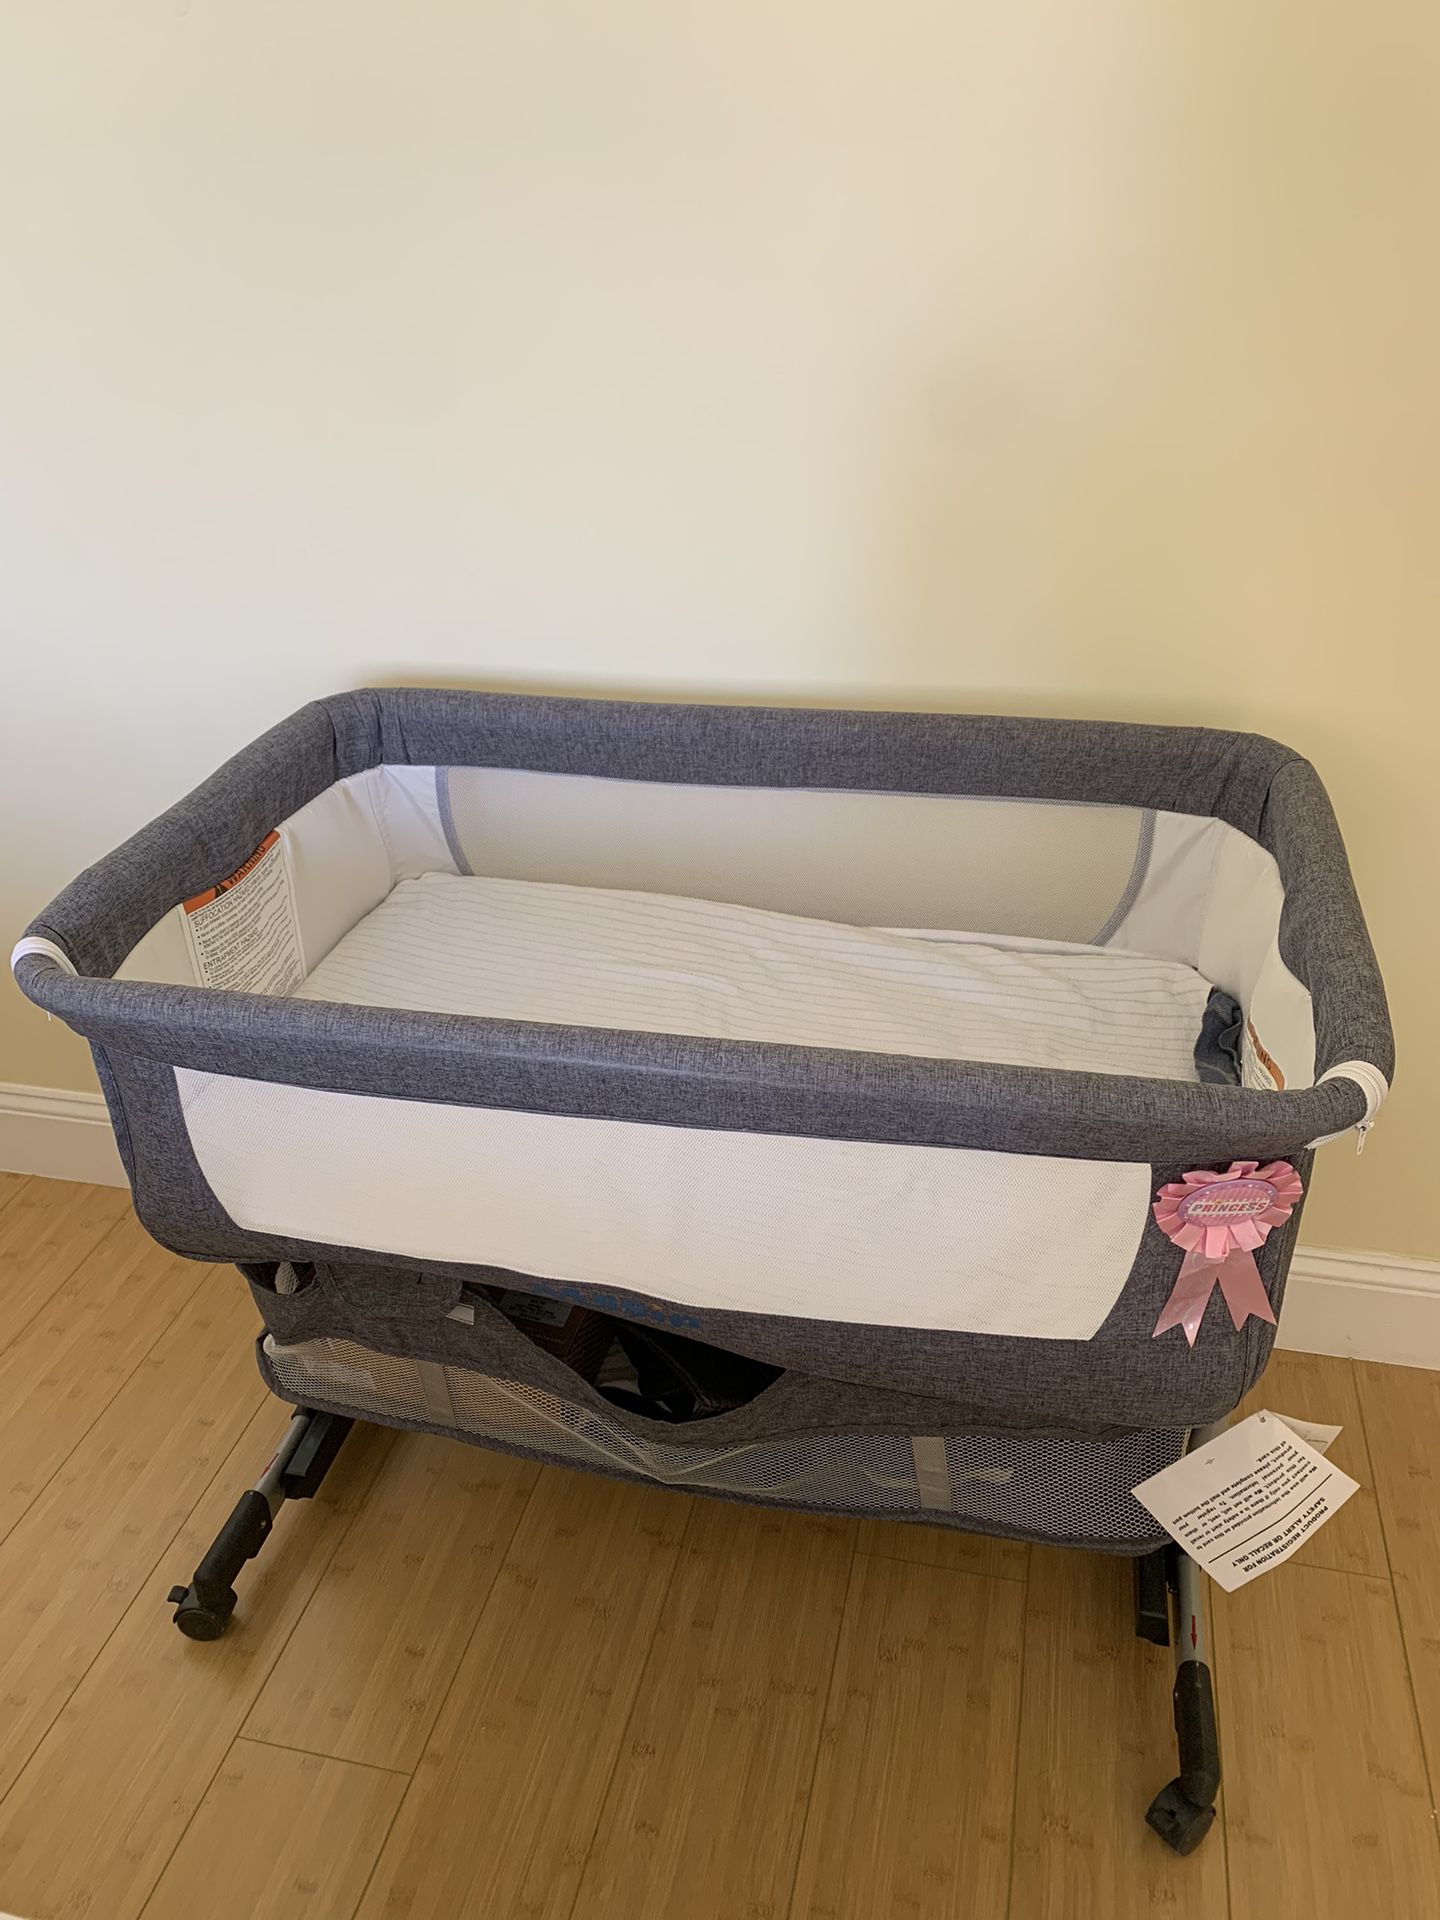 Bedside  Baby Crib New And No Pet House